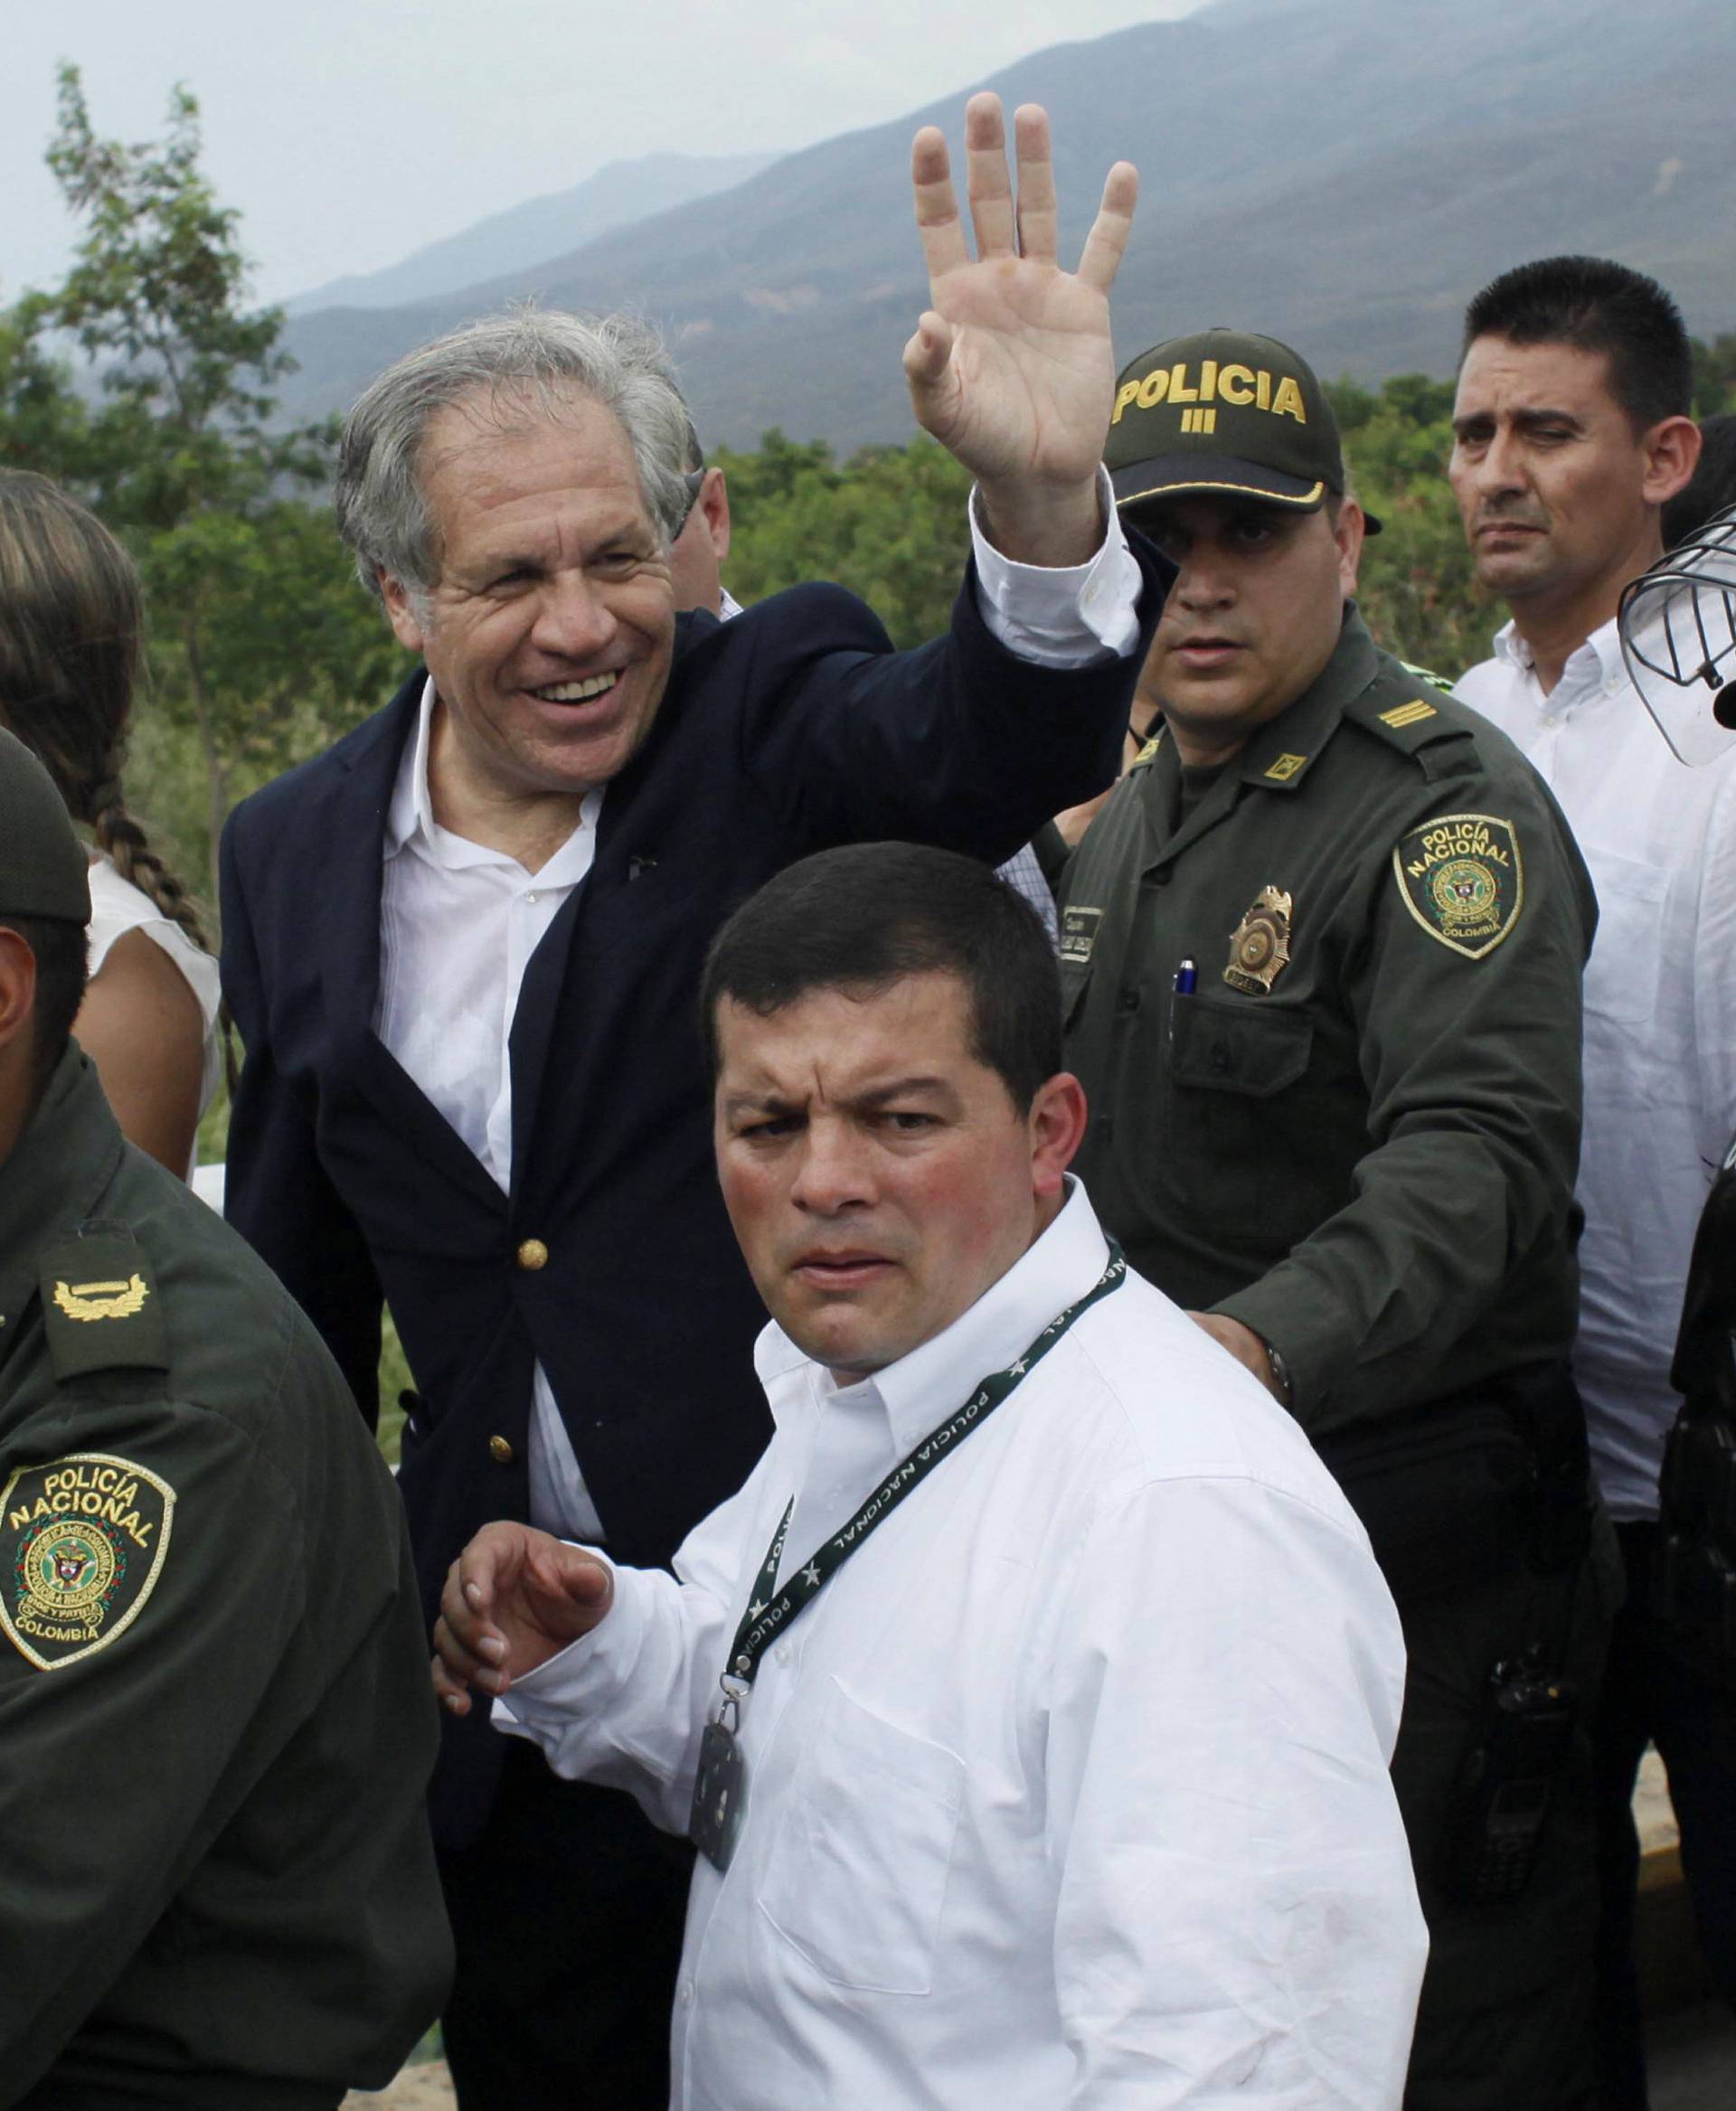 OAS Secretary General Almagro waves to people during his visit to the Colombia-Venezuela border at the Simon Bolivar international bridge in Cucuta